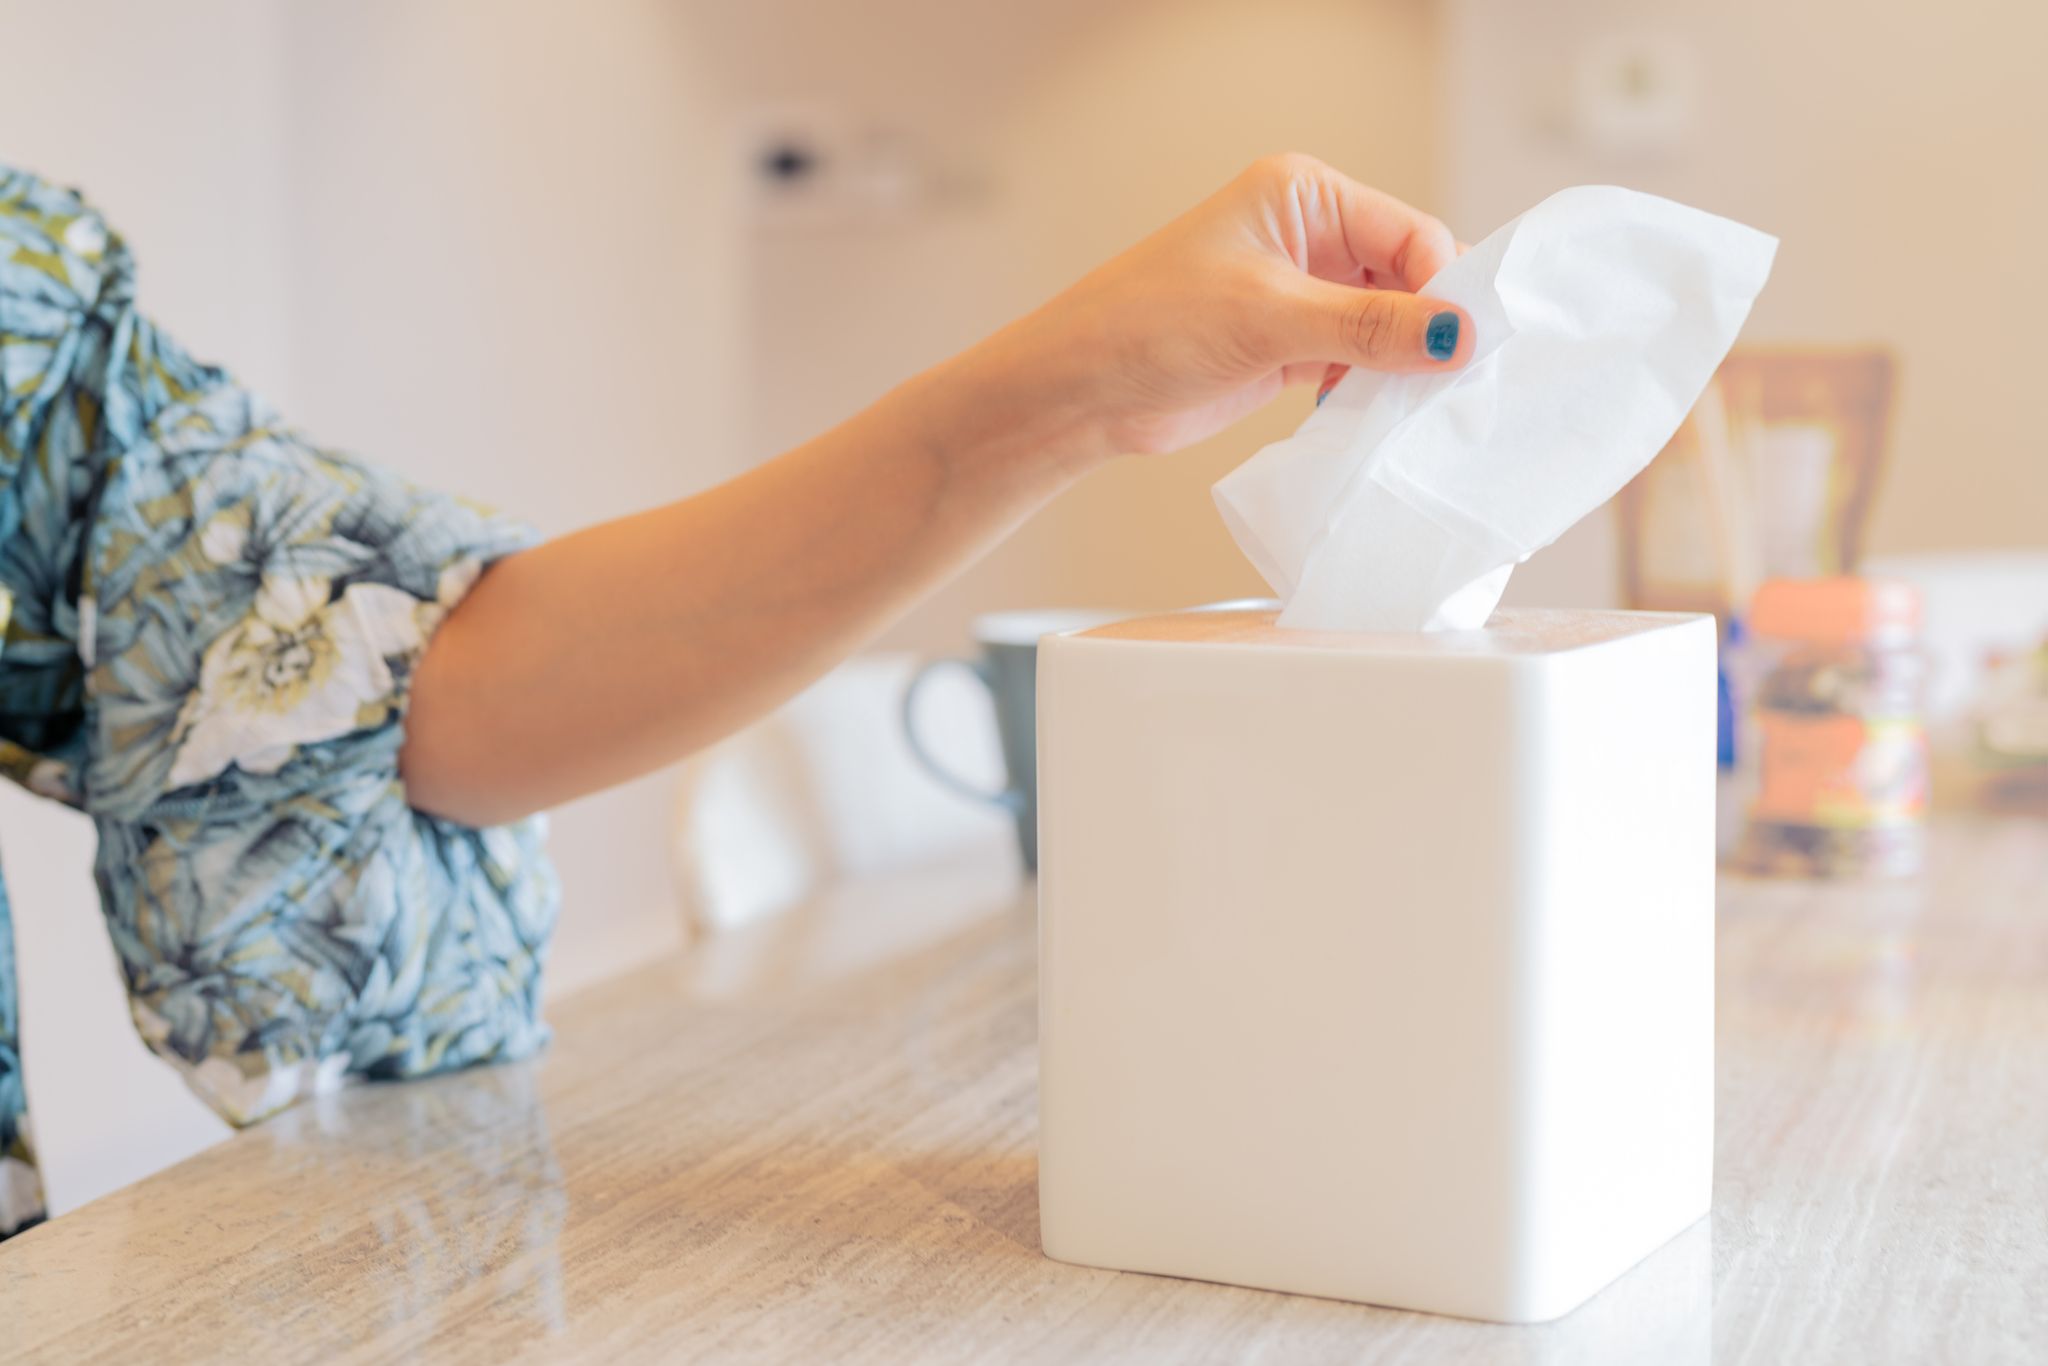 Cropped Hand Of Woman Pulling Tissue From Box On Table